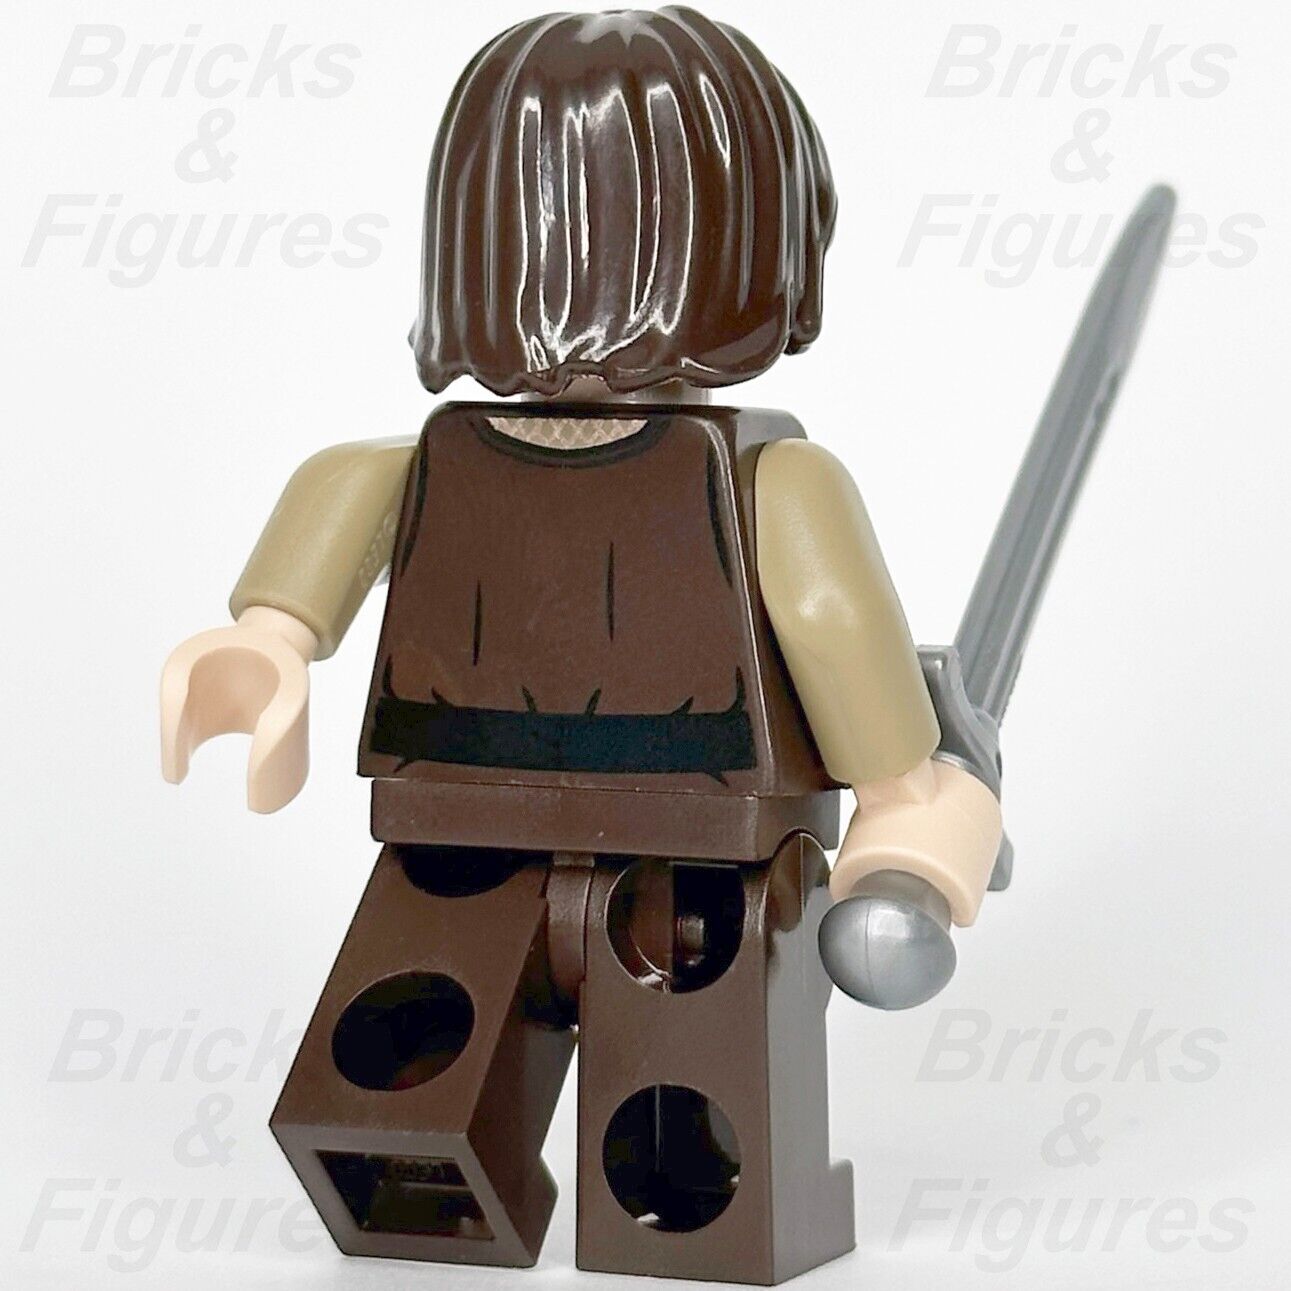 LEGO Aragorn Minifigure The Hobbit The Lord of the Rings Strider 10316 lor129 - Bricks & Figures